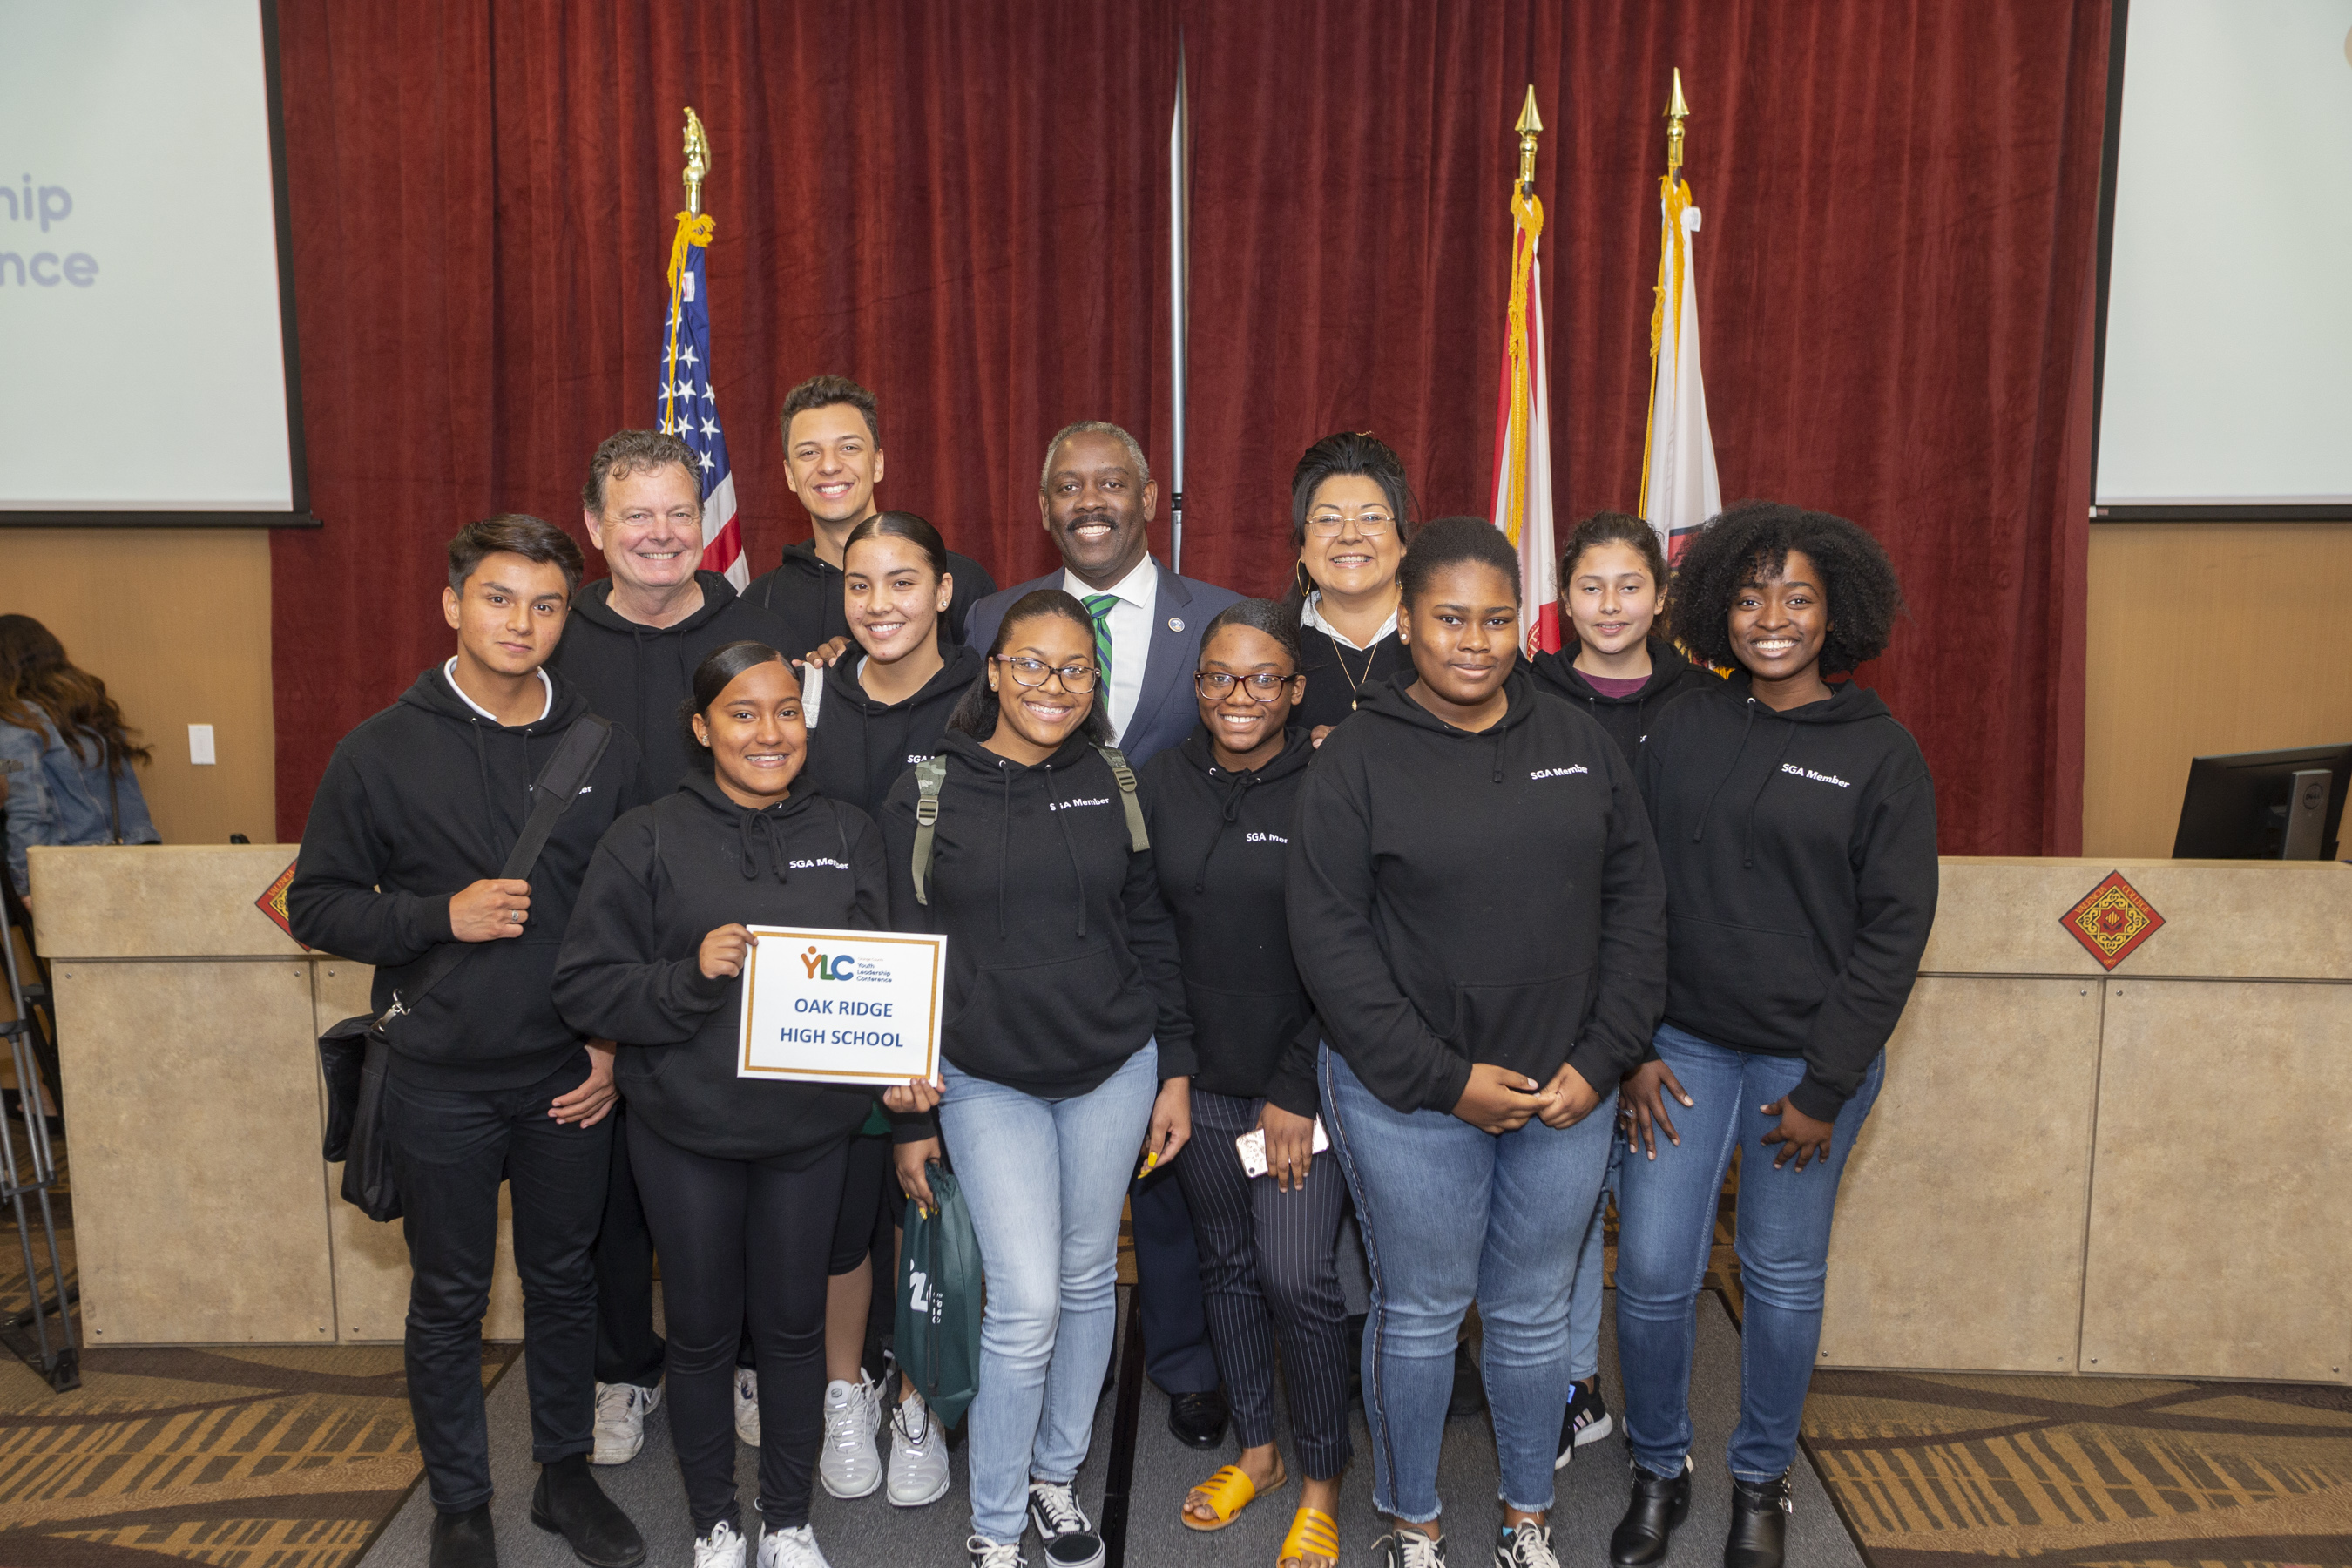 Isue Sopron pictured with his classmates and Mayor Demings at the Youth Leadership Conference